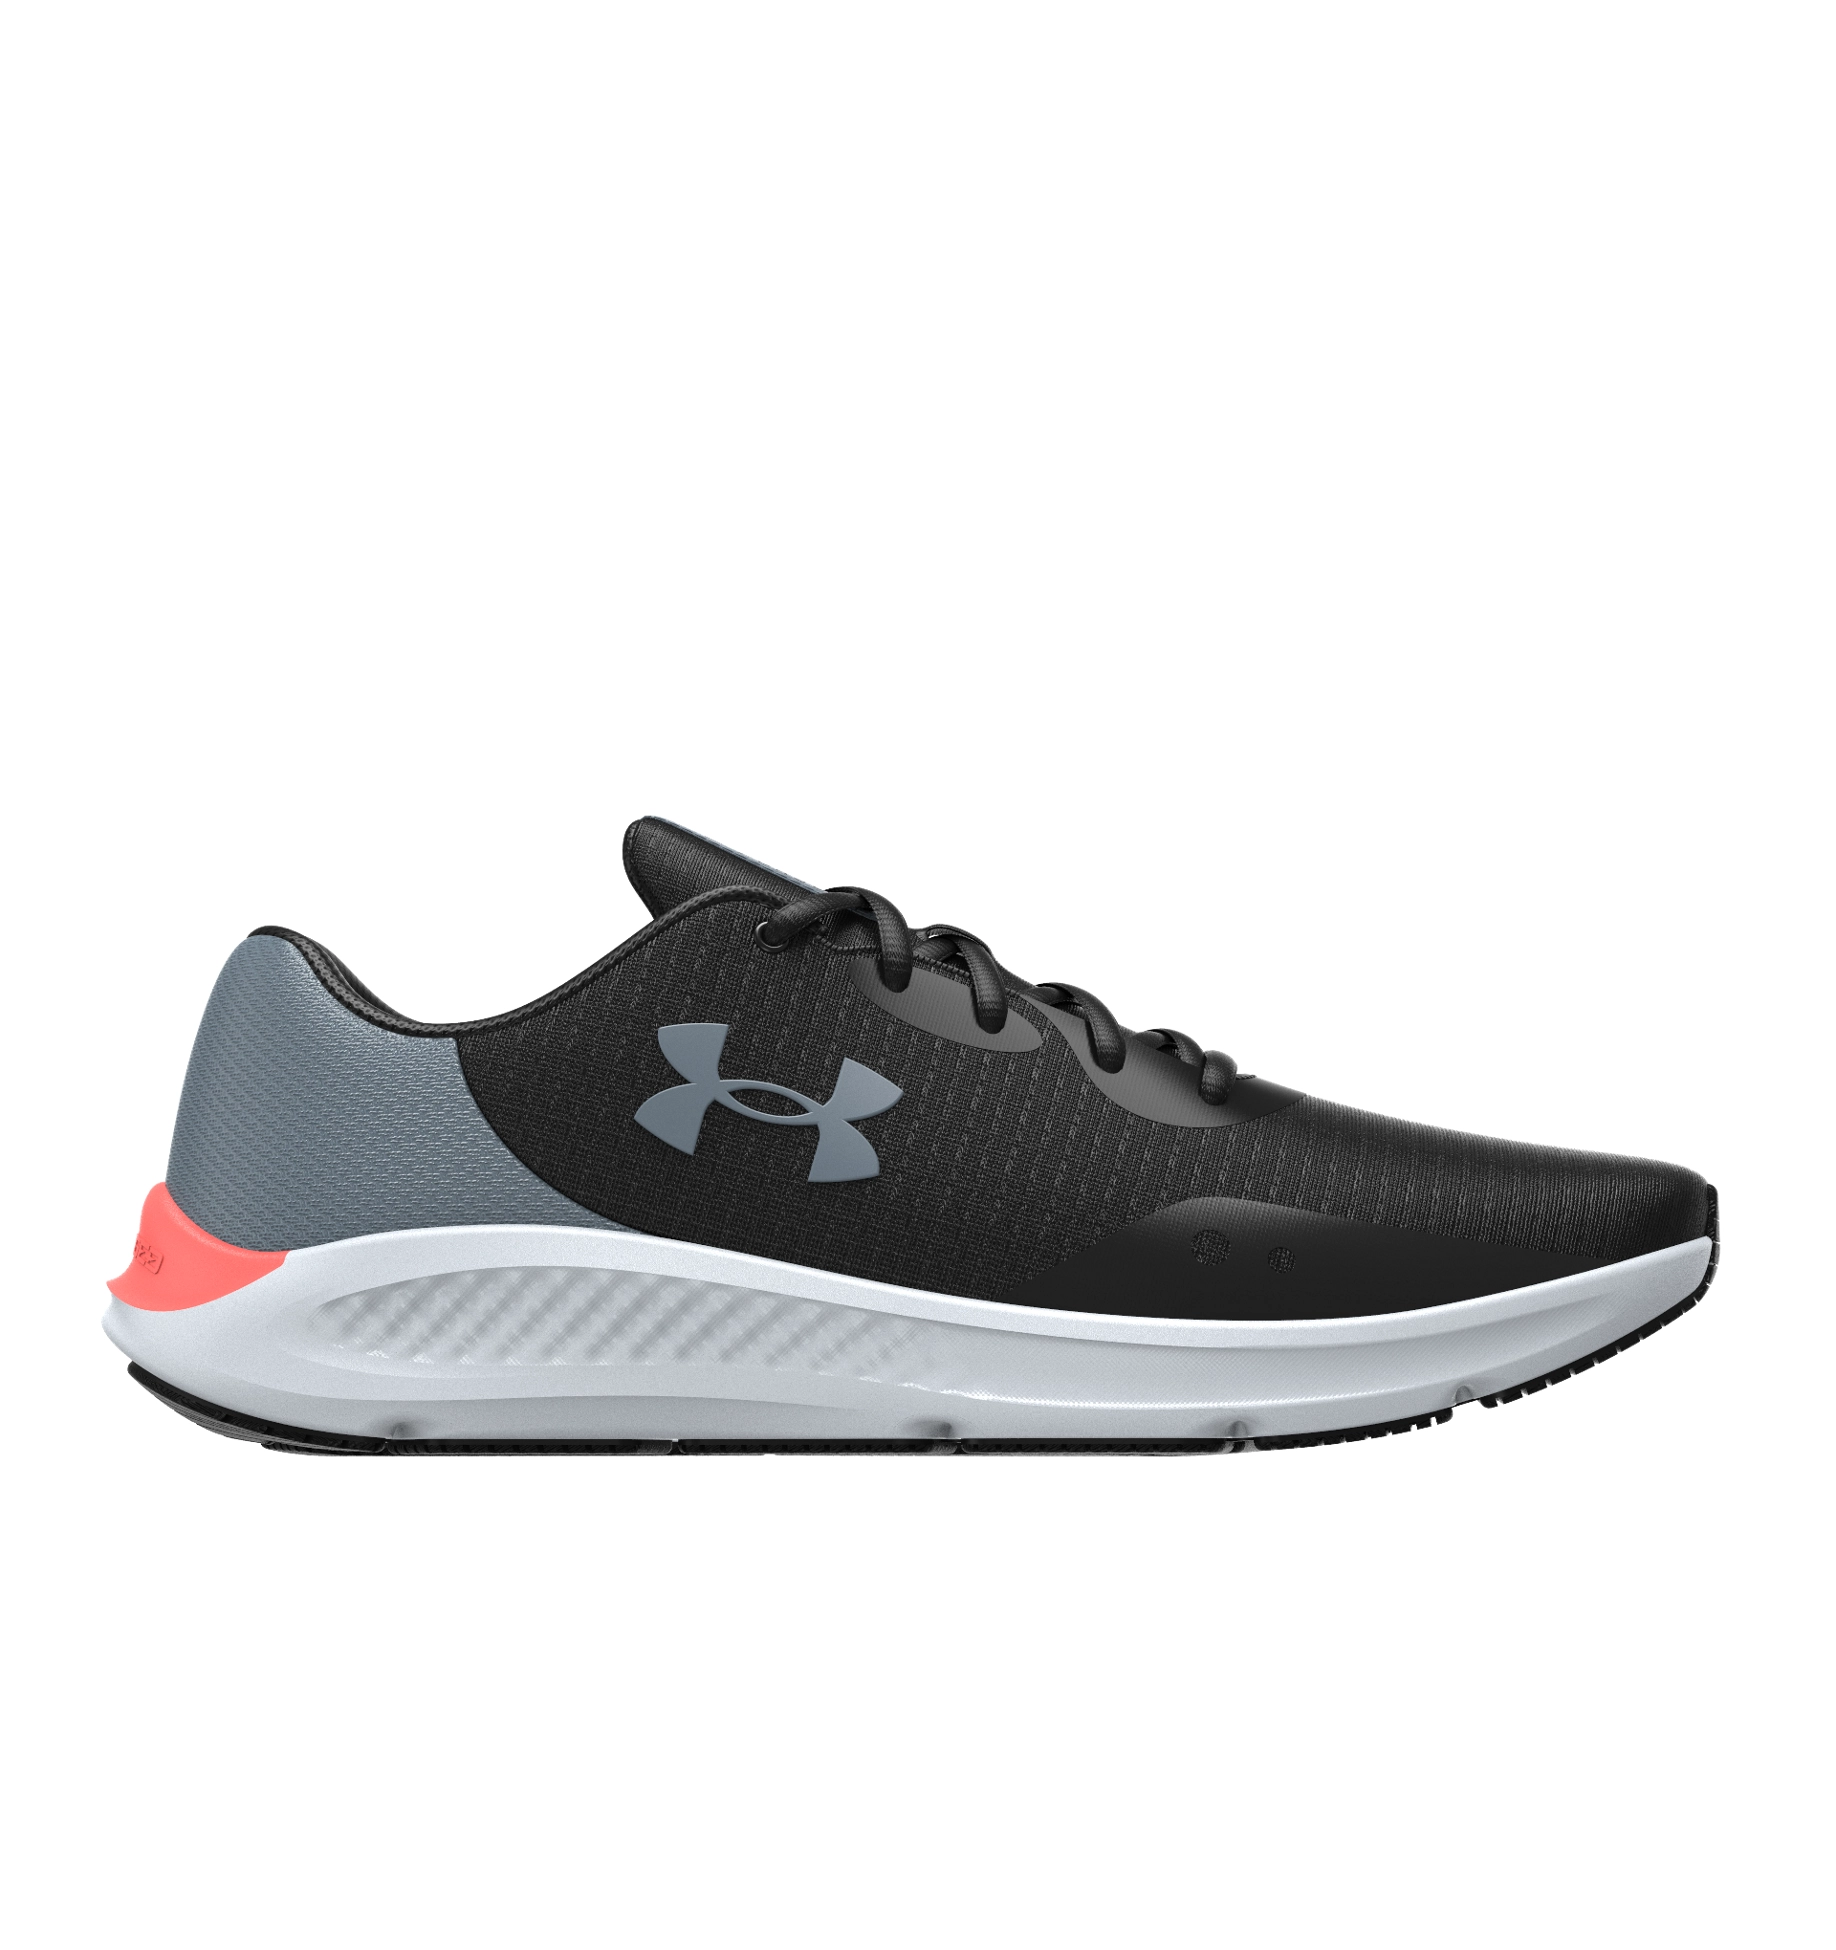 E195924 Under Armour Men's Charged Pursuit 3 Tech Running Shoes 3025424